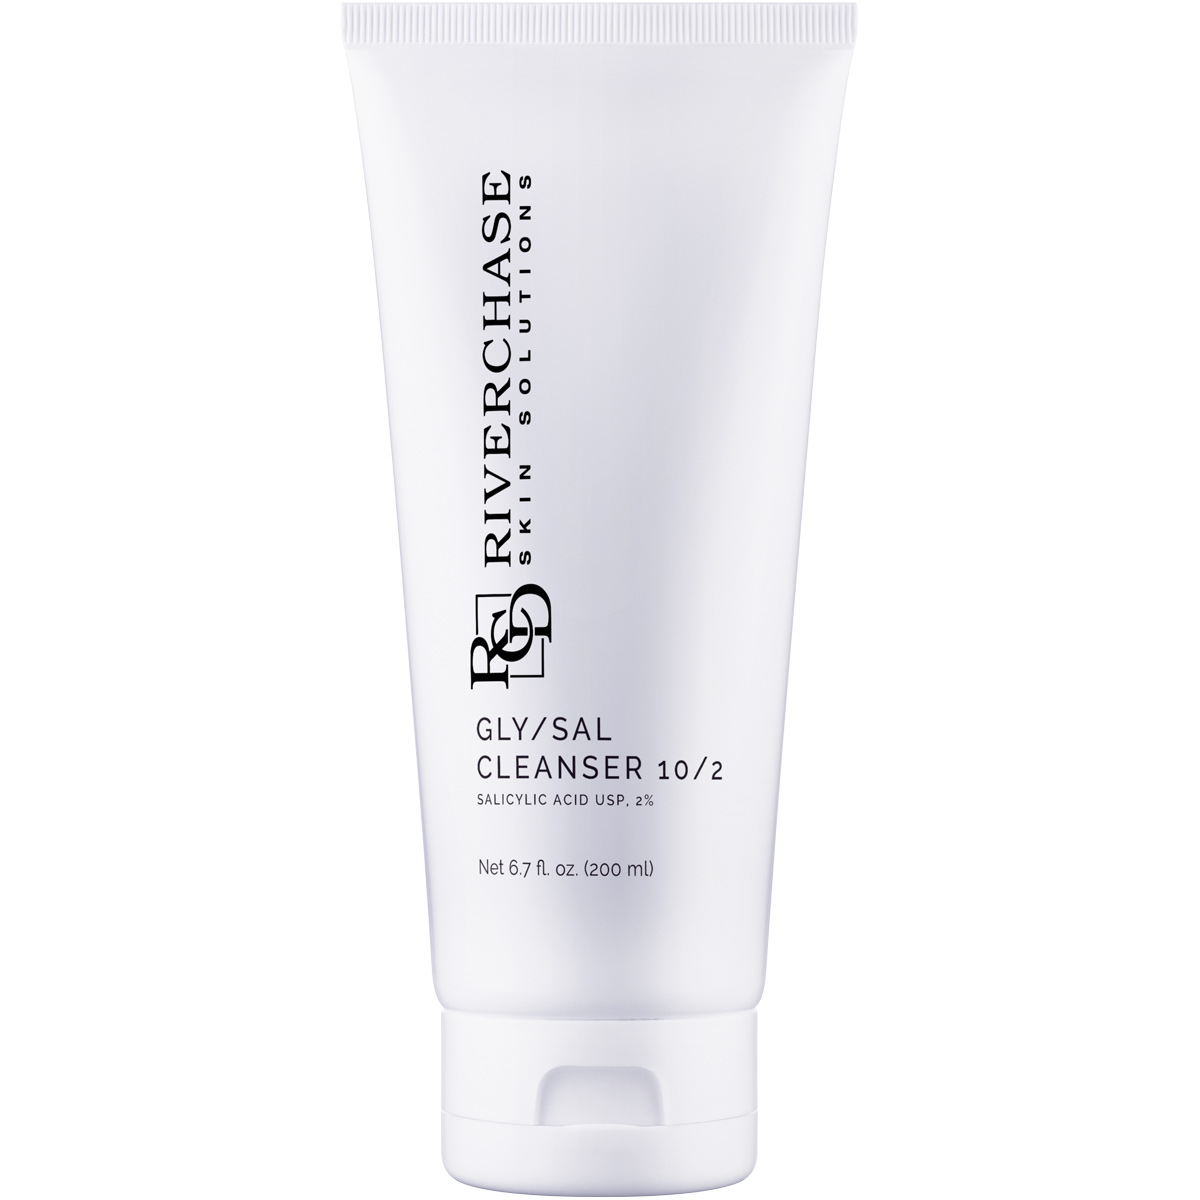 Gly/Sal Cleanser 10/2